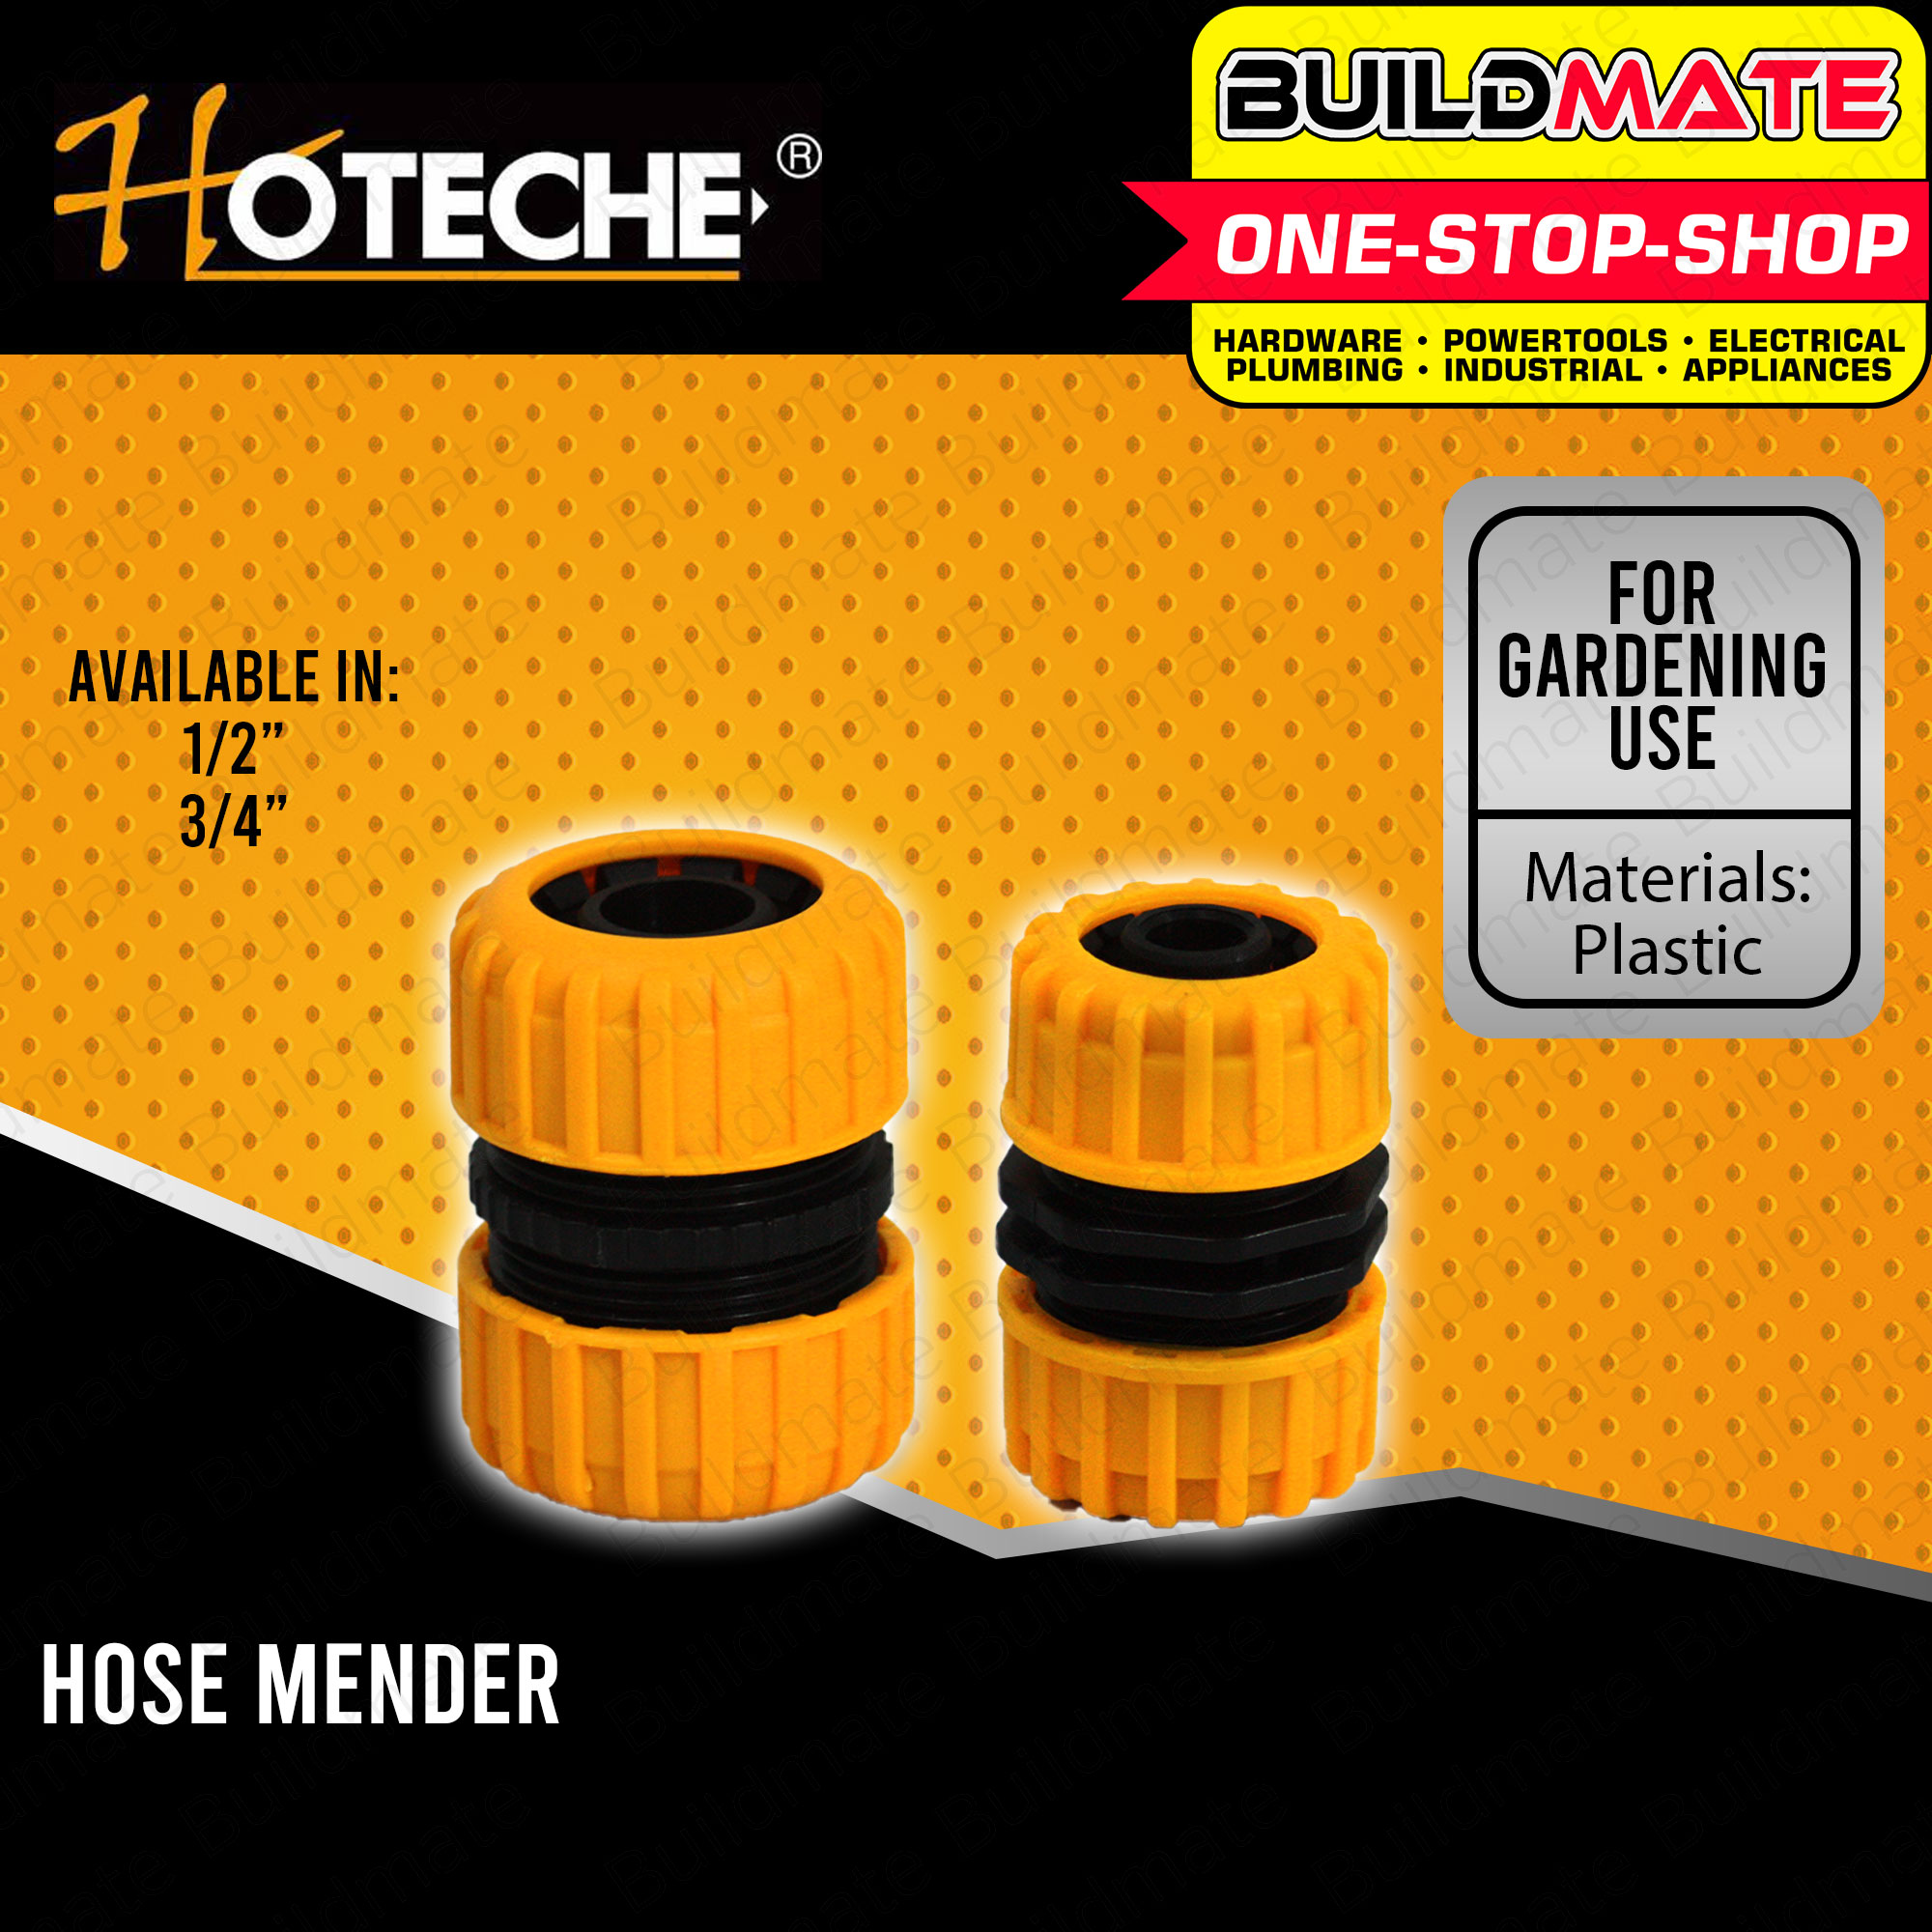 Buy HOTECHE Top Products at Best Prices online | lazada.com.ph